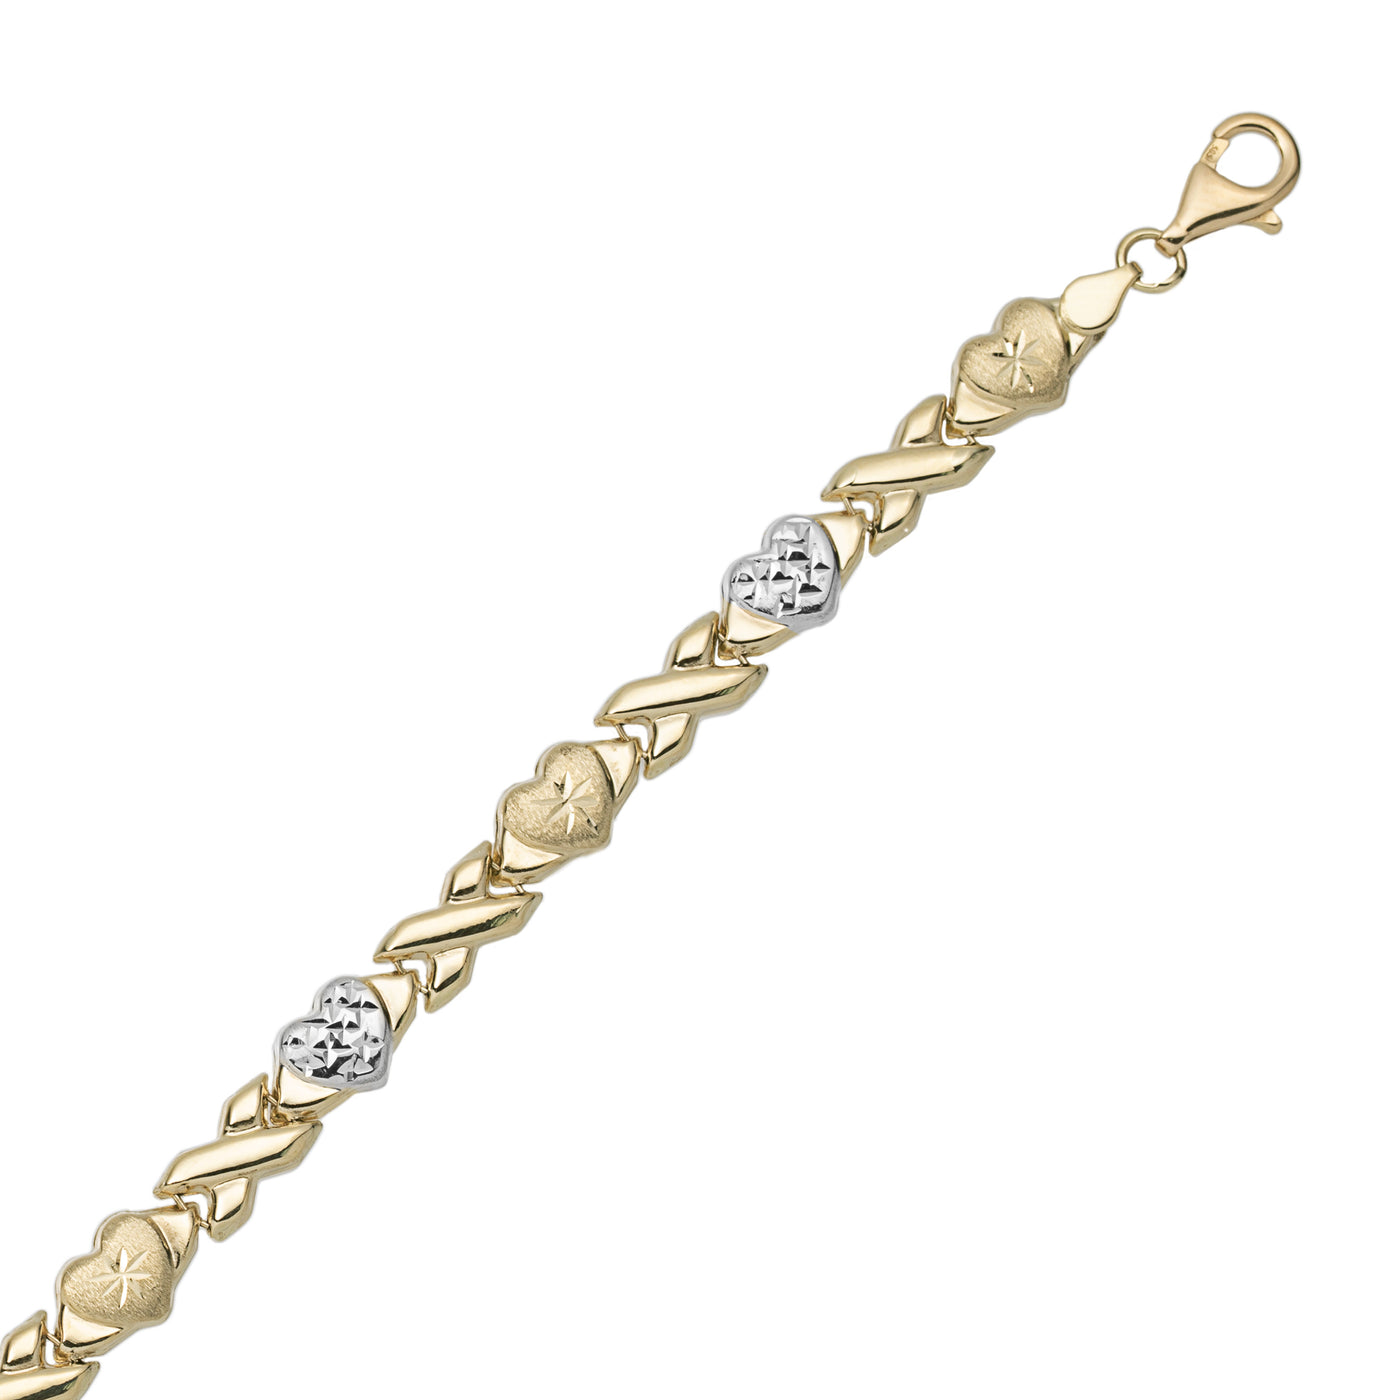 7mm Diamond-Cut Hearts & Kisses Stampato Necklace 10K Yellow White Gold